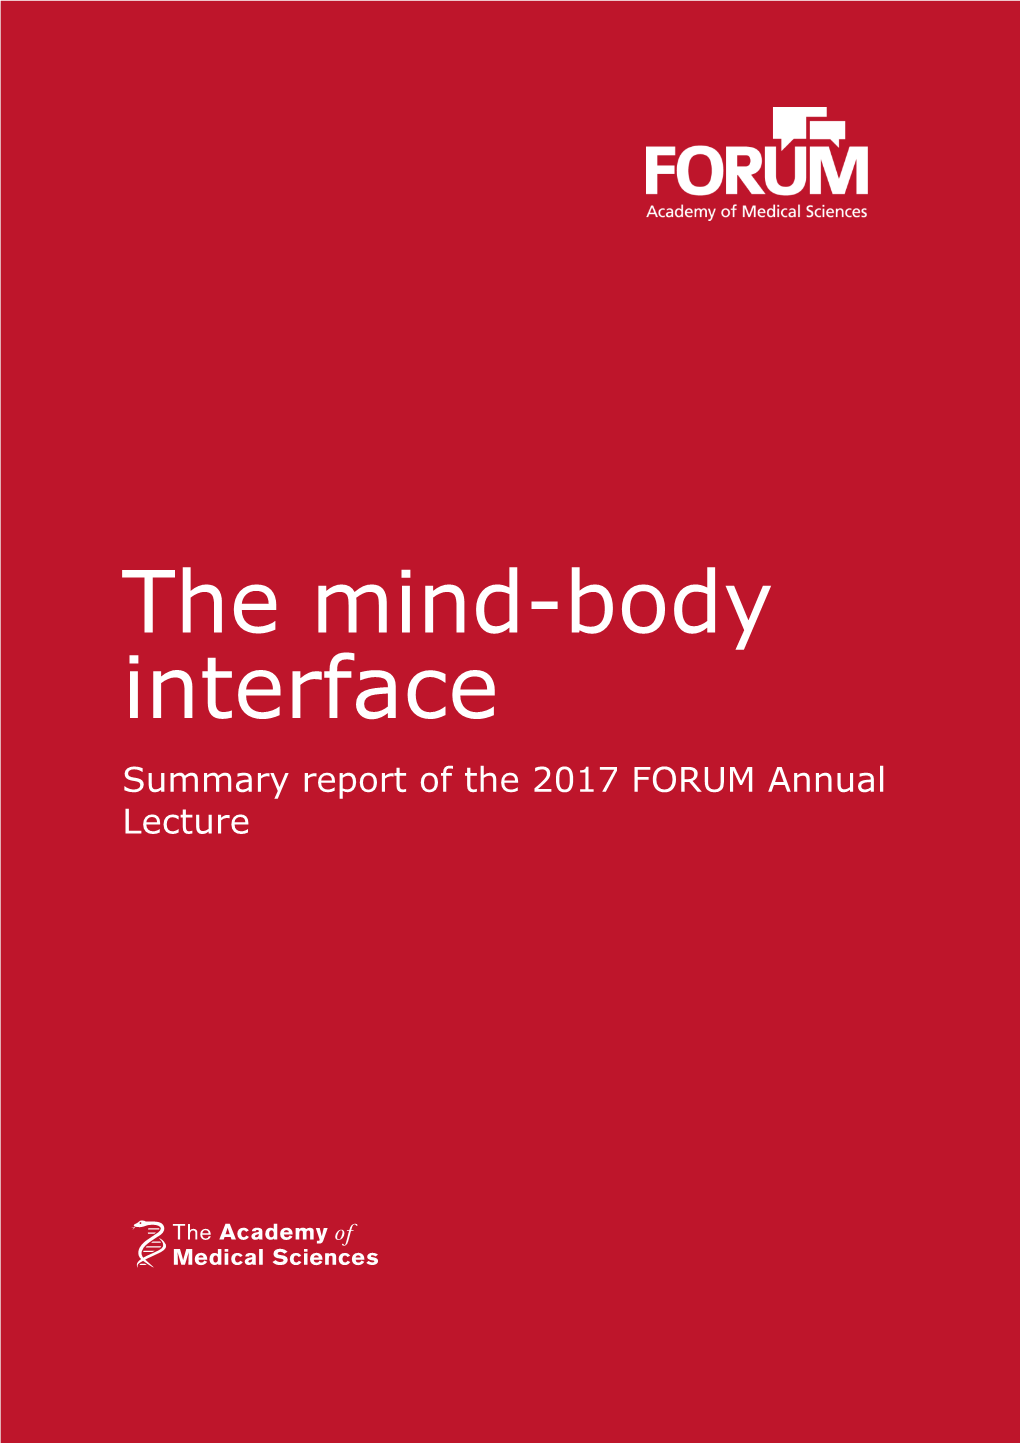 FORUM Annual Lecture: the Mind-Body Interface